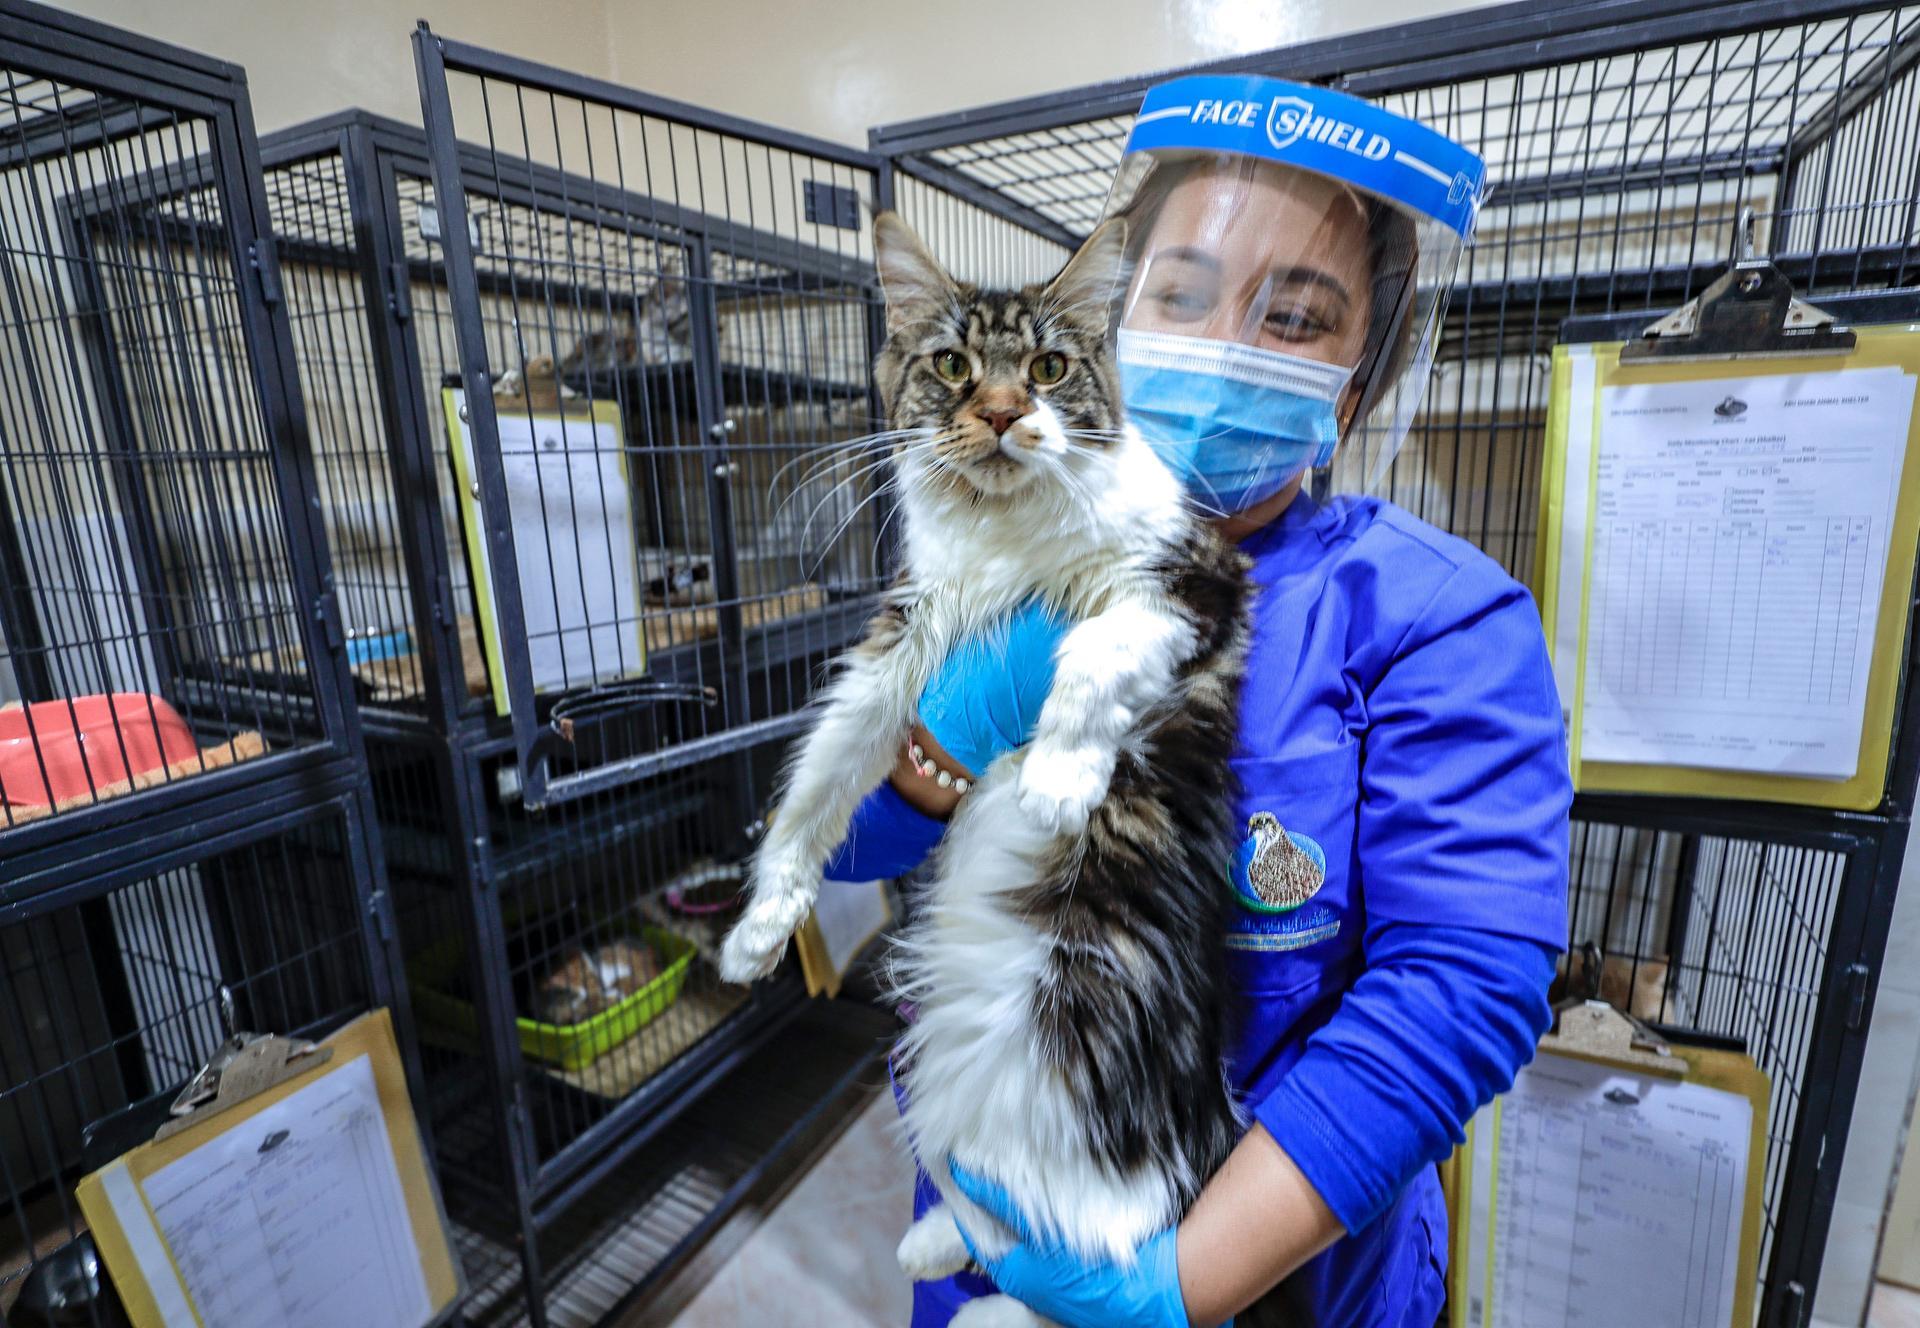 Uae Animal Owners Urged To Plan Ahead To Avoid Shock Of Pet Relocation Costs